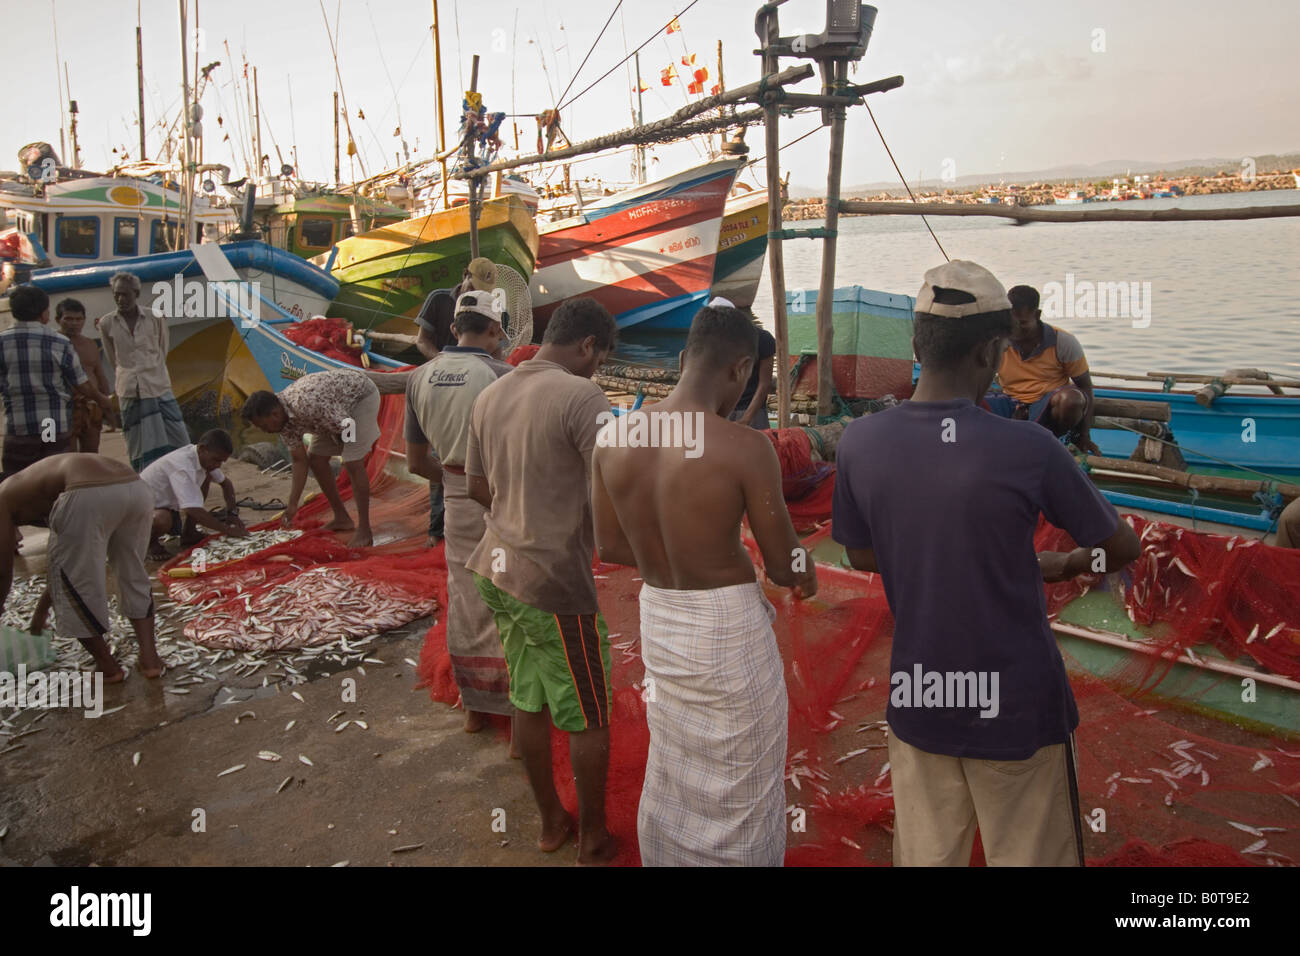 Fisherman sorting the catch at Mirissa fishing harbour, Sri Lanka which was rebuilt after the tsunami. Stock Photo